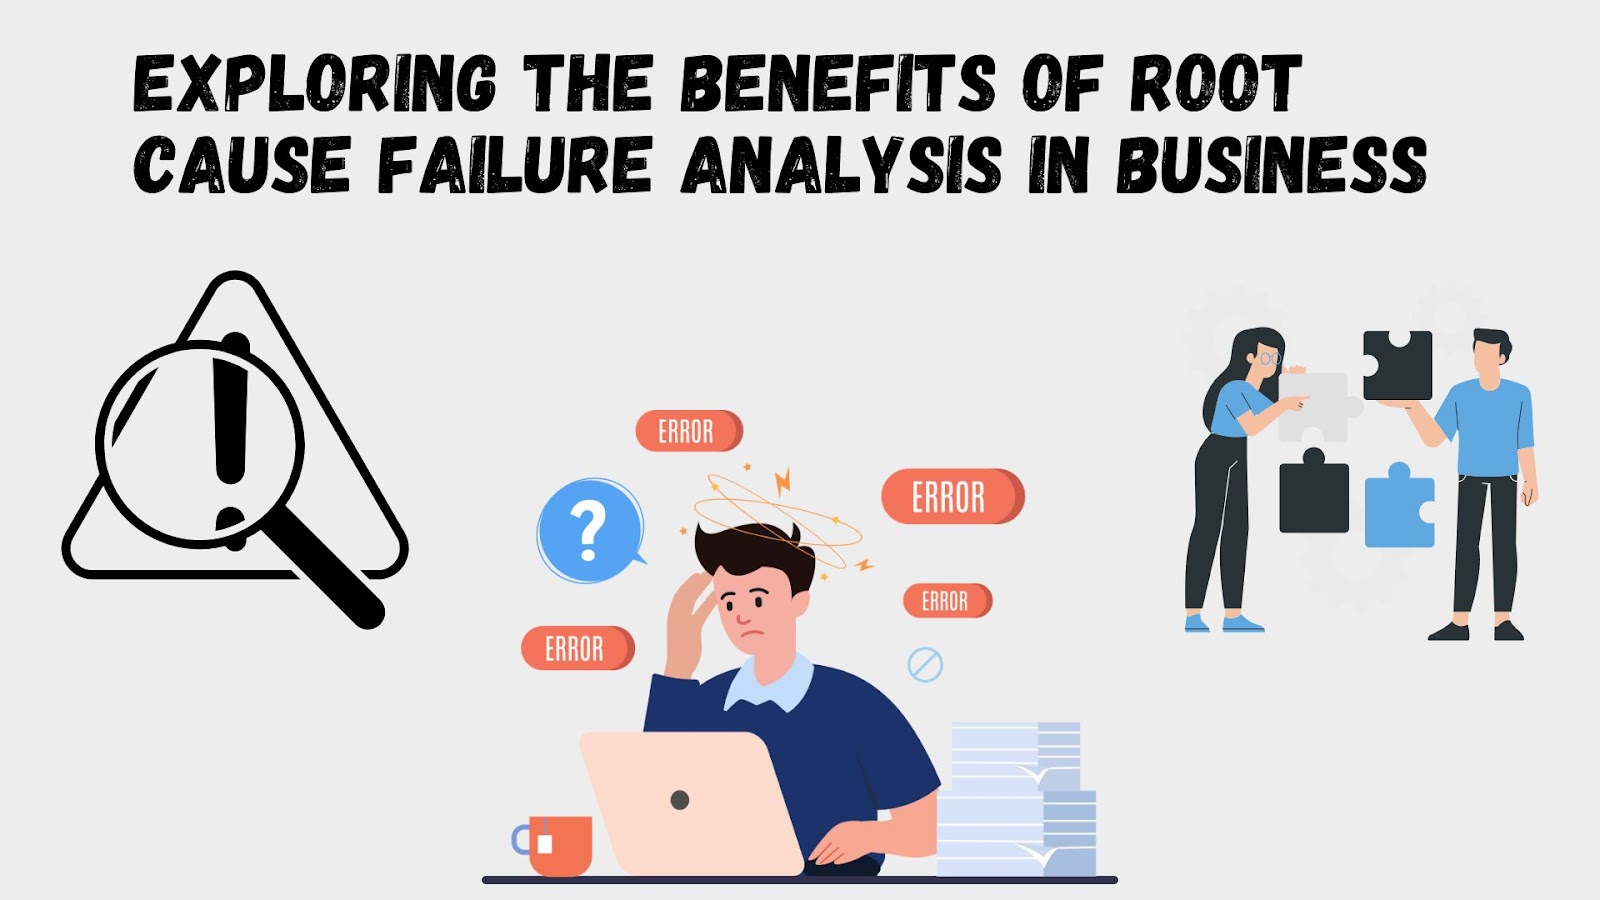 Exploring the Benefits of Root Cause Failure Analysis in Business